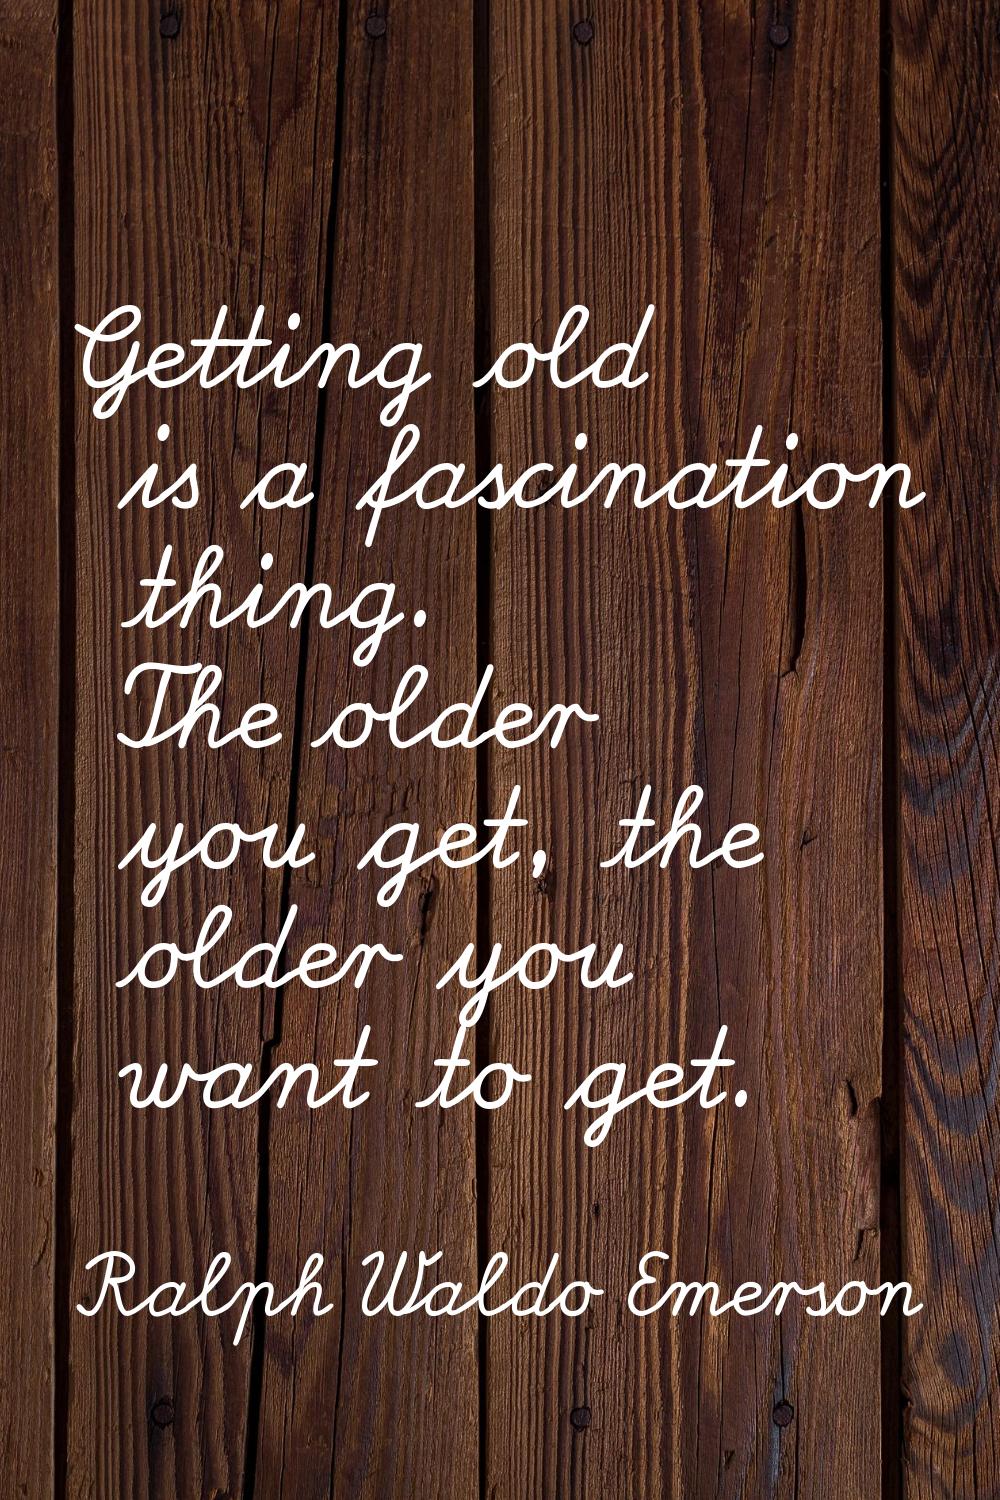 Getting old is a fascination thing. The older you get, the older you want to get.